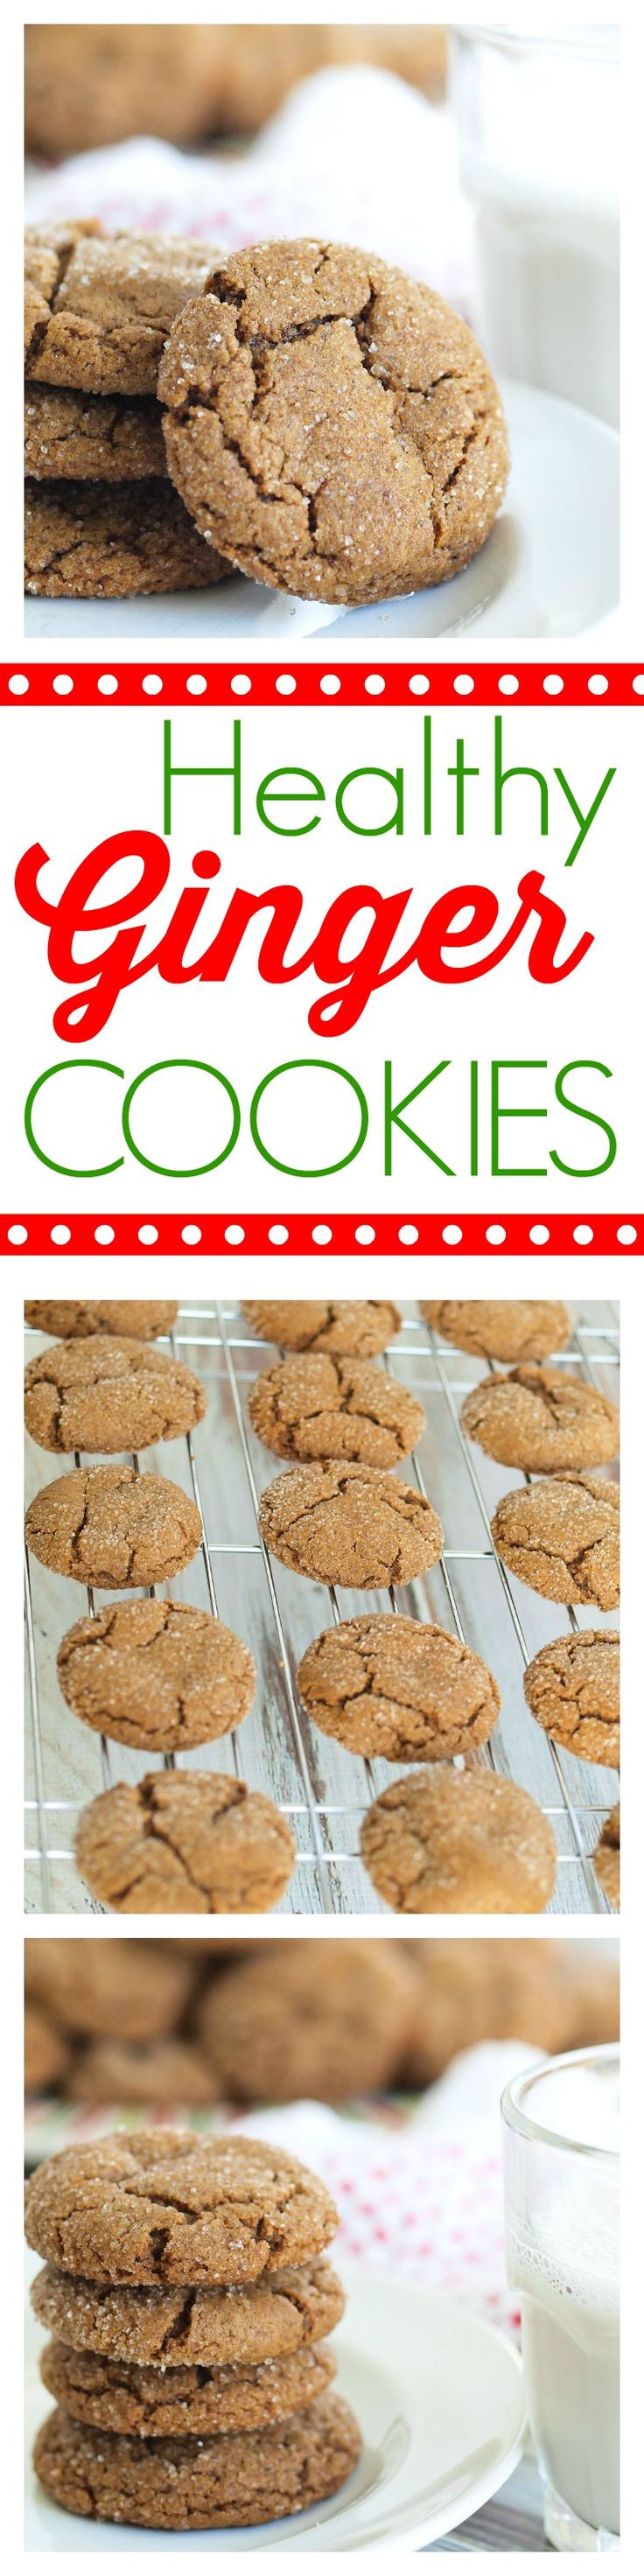 Healthy Christmas Baking
 100 Christmas cookie recipes on Pinterest